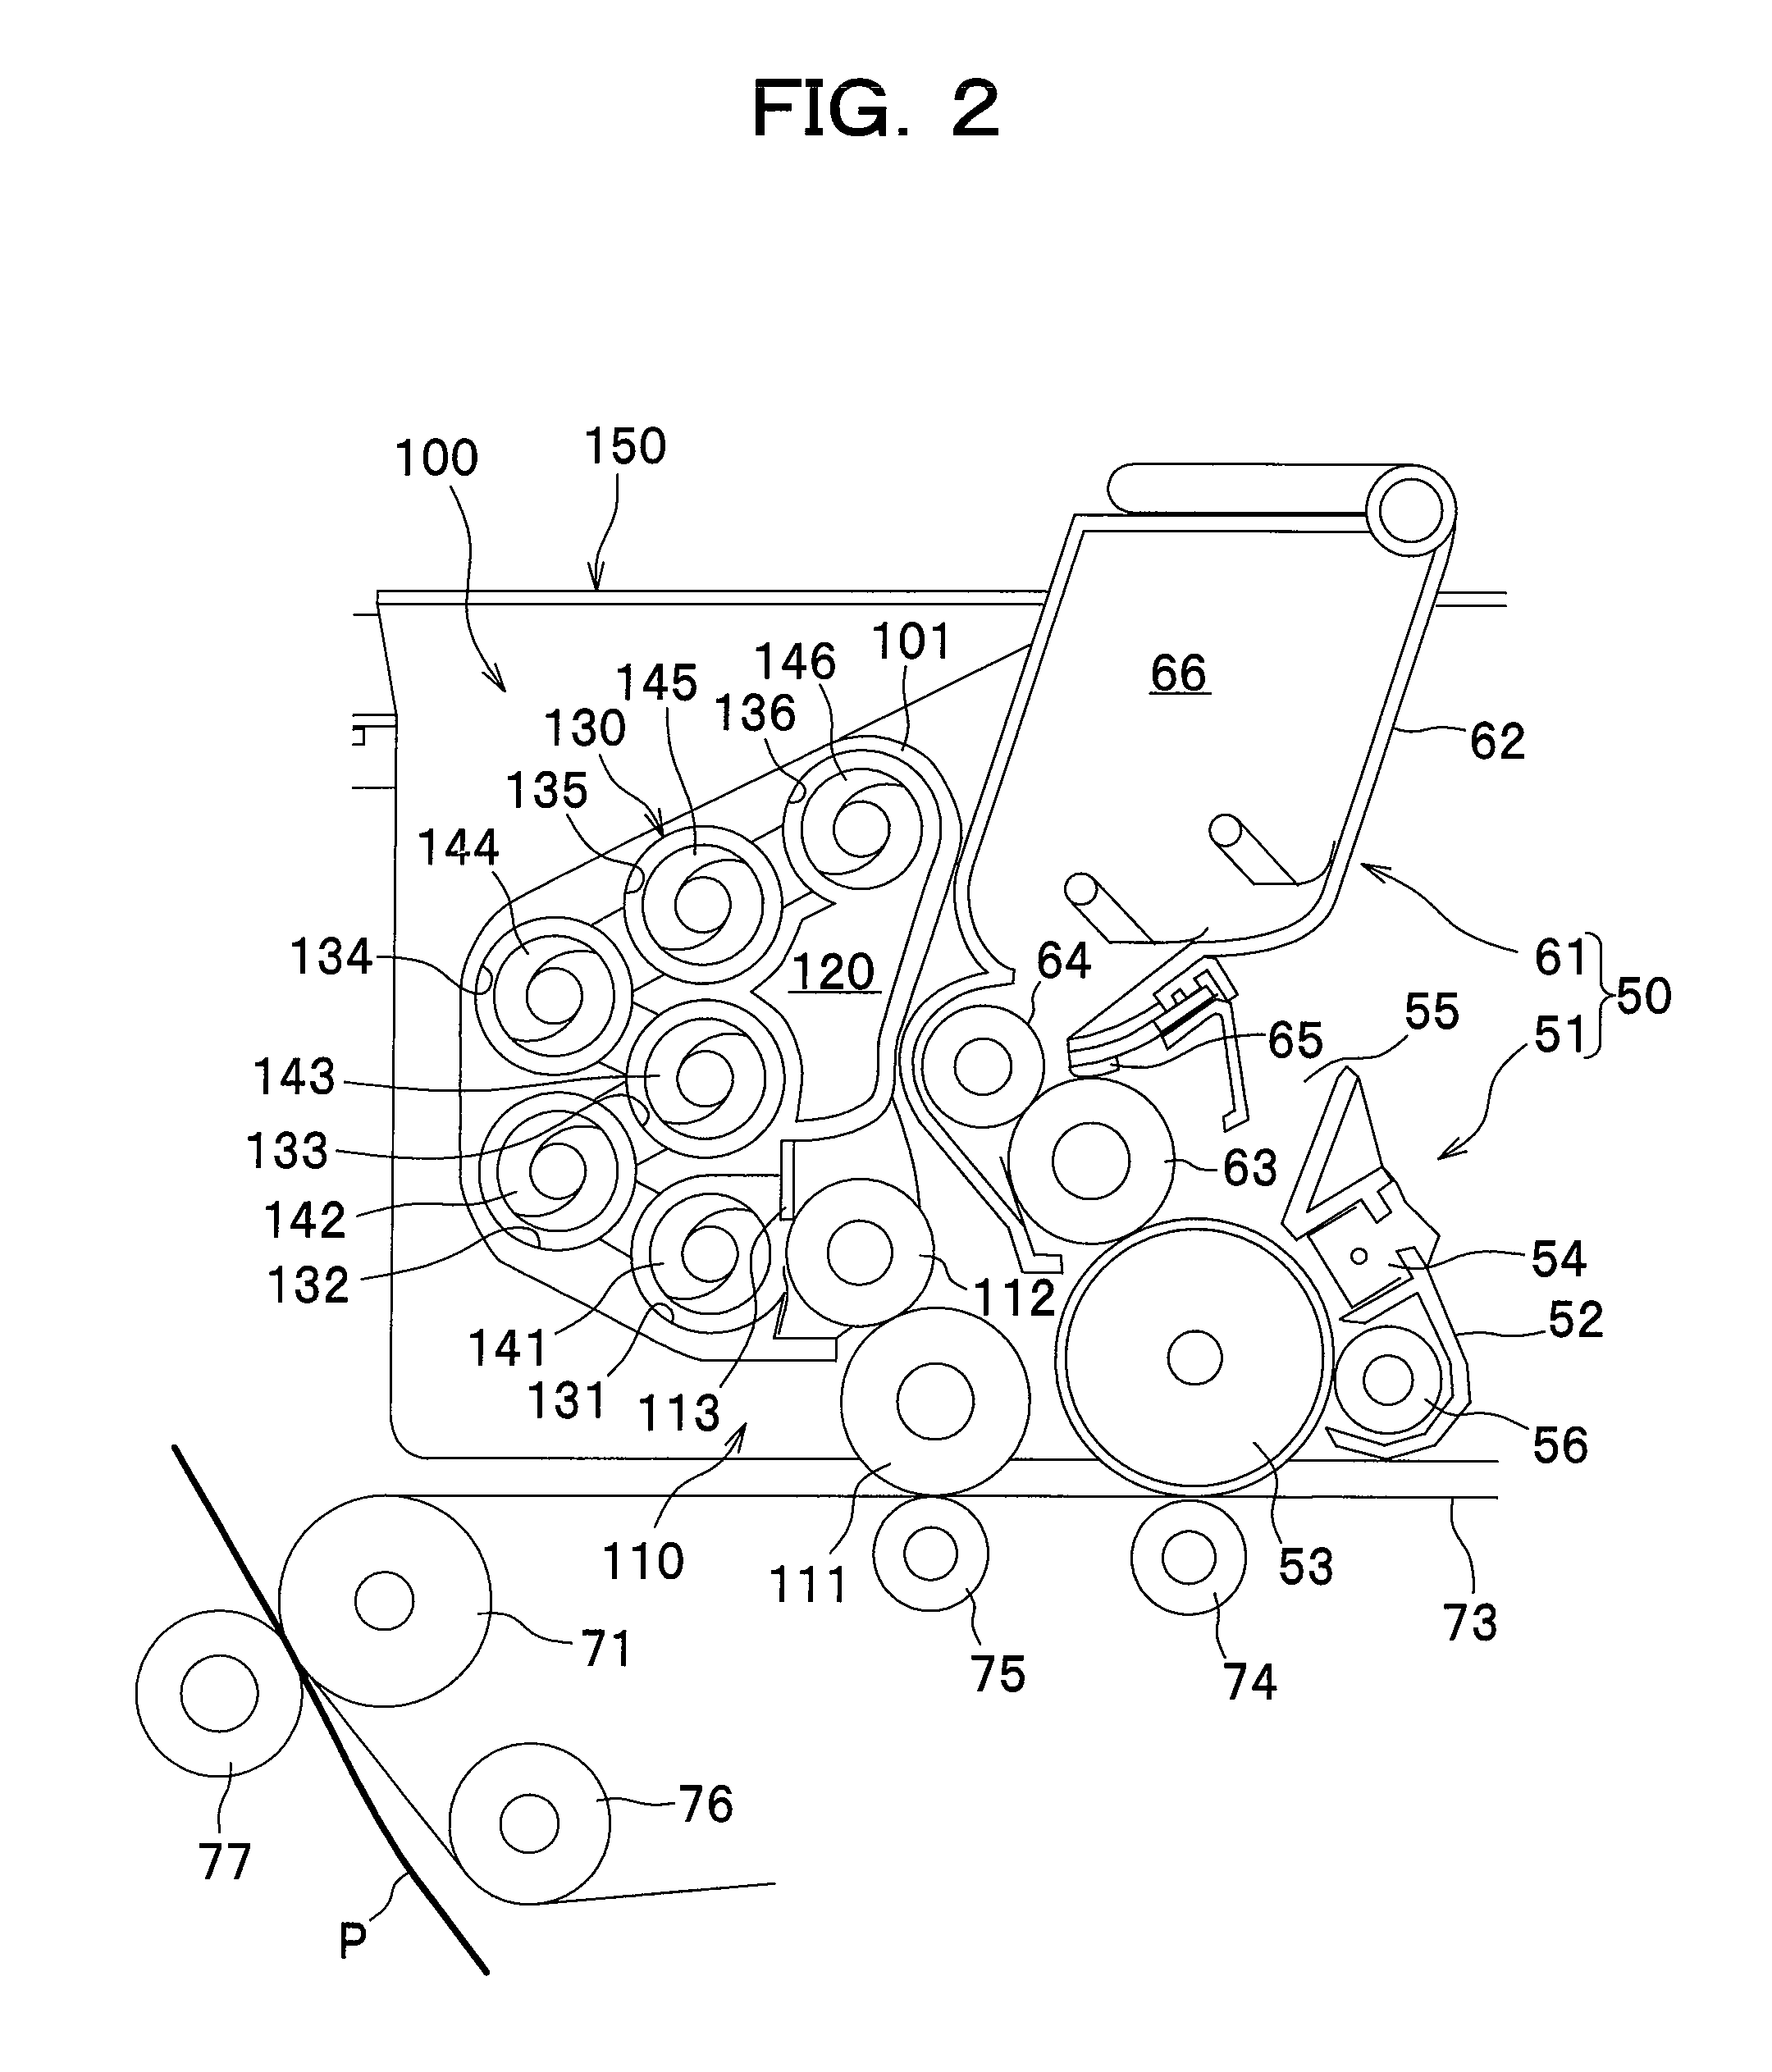 Image forming apparatus with a cleaning device